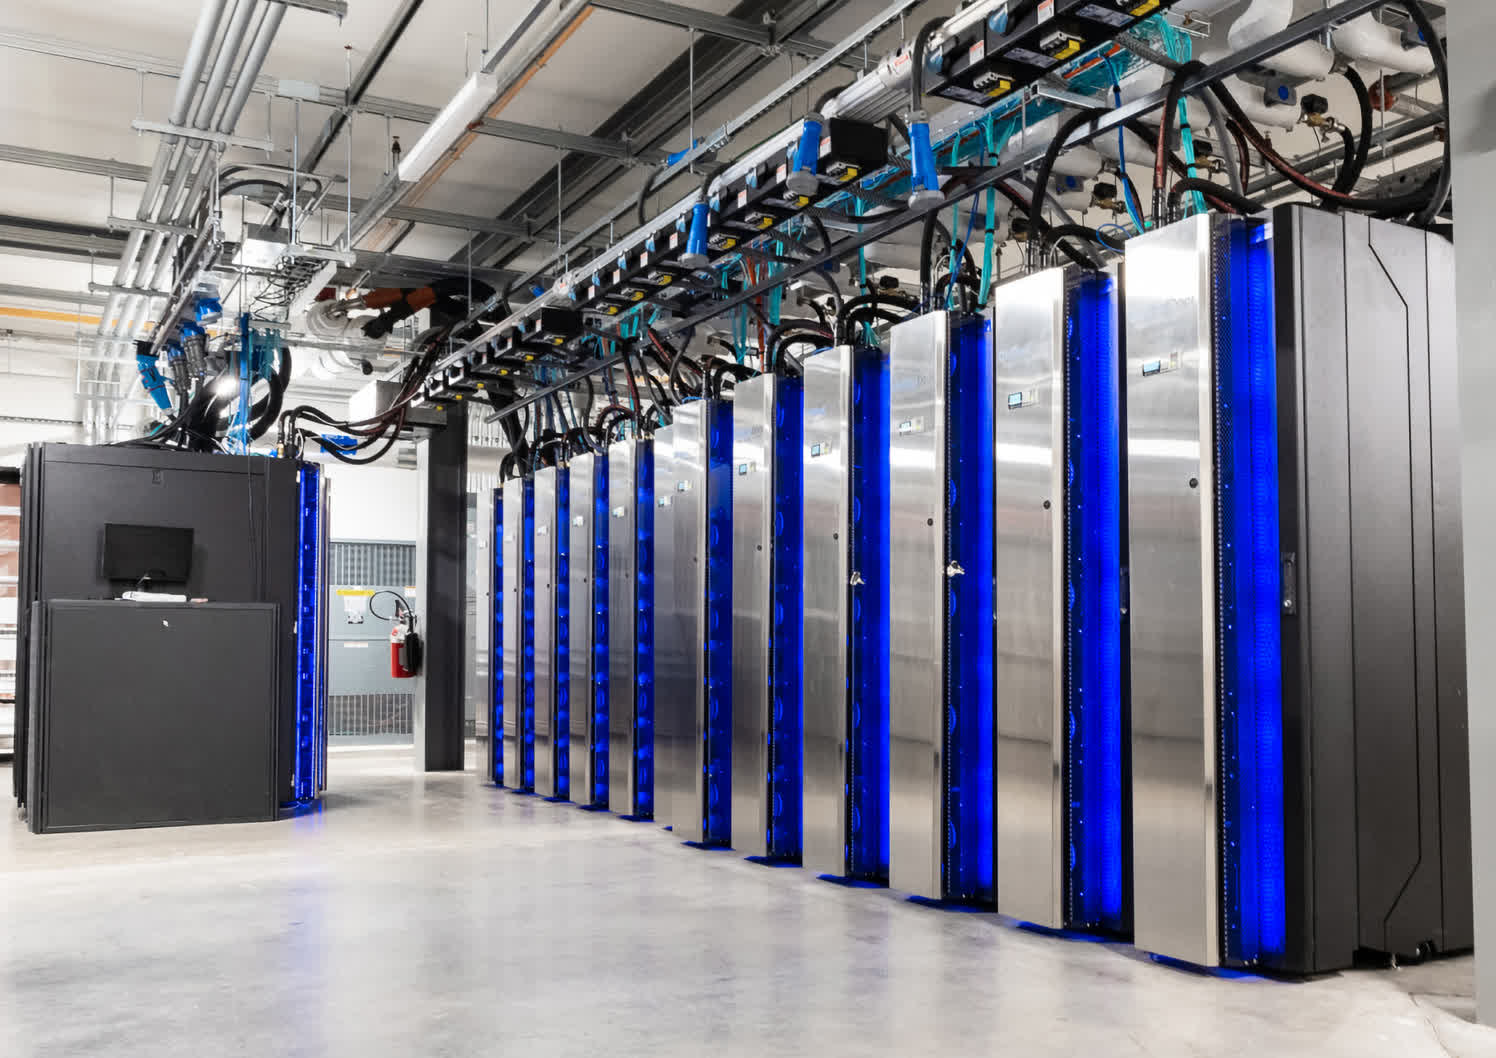 NOAA triples supercomputing capacity to provide more accurate and timely weather forecasts